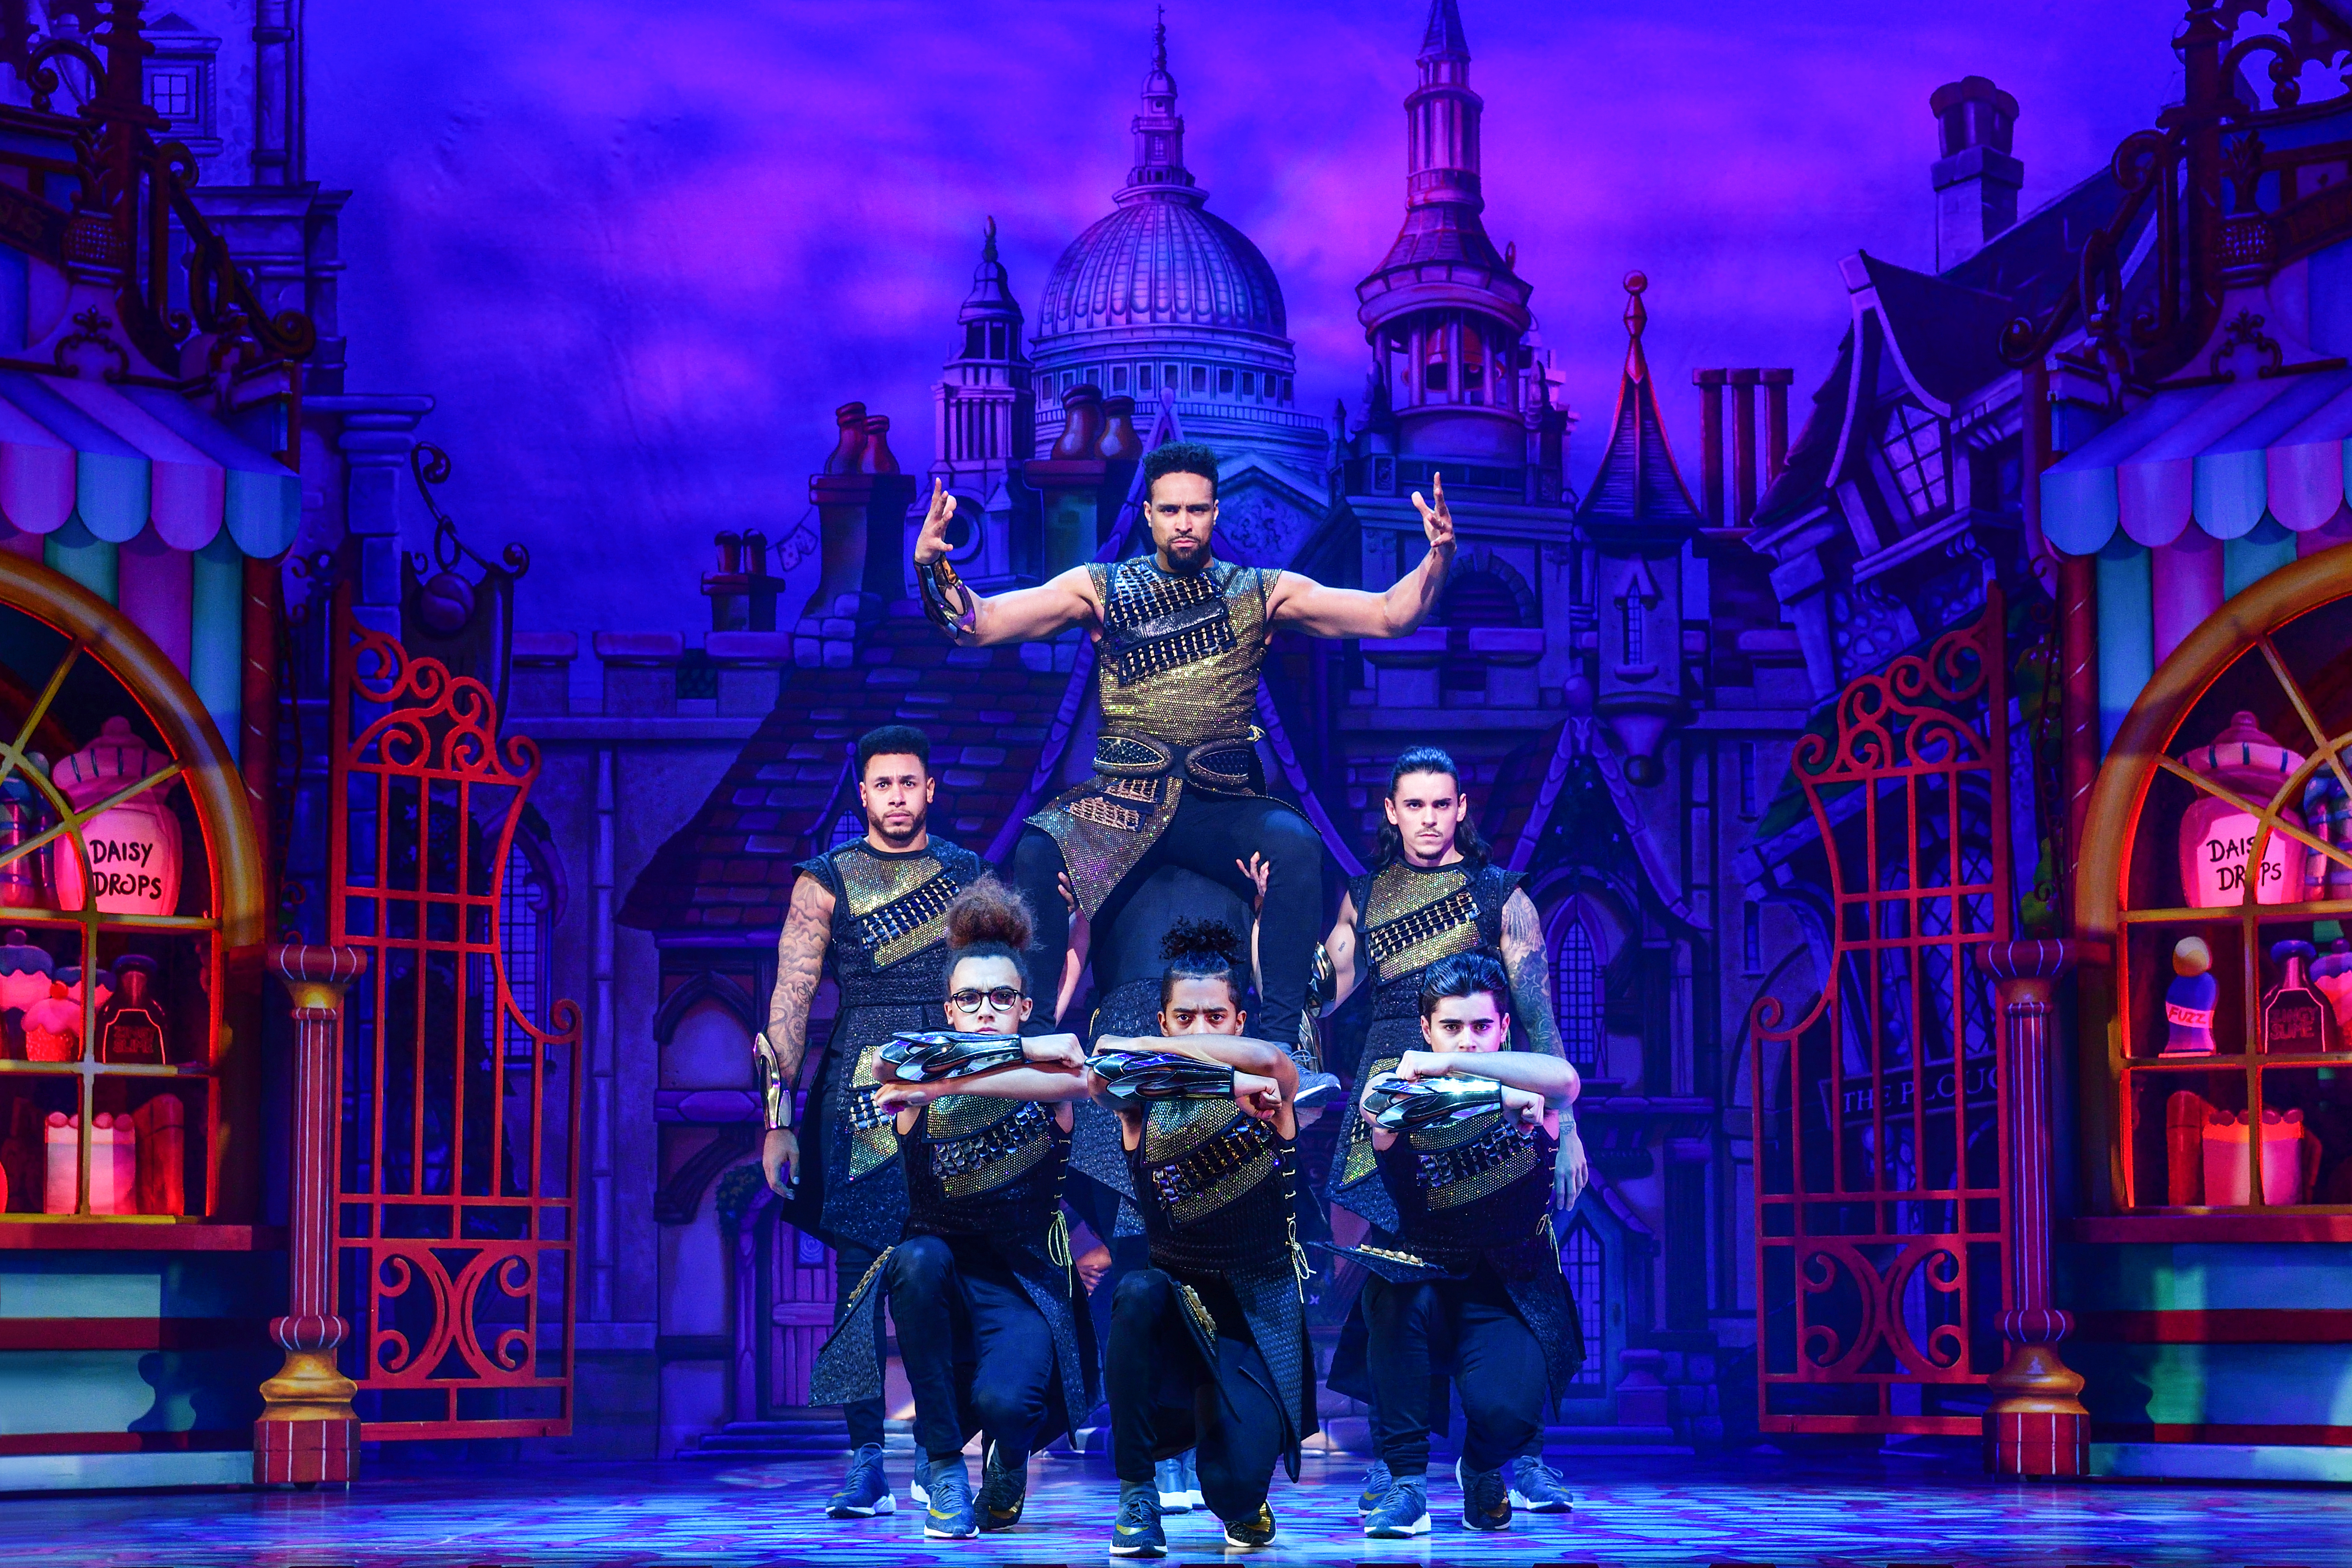 Ashley Banjo and Diversity as The Sultan and His Advisers